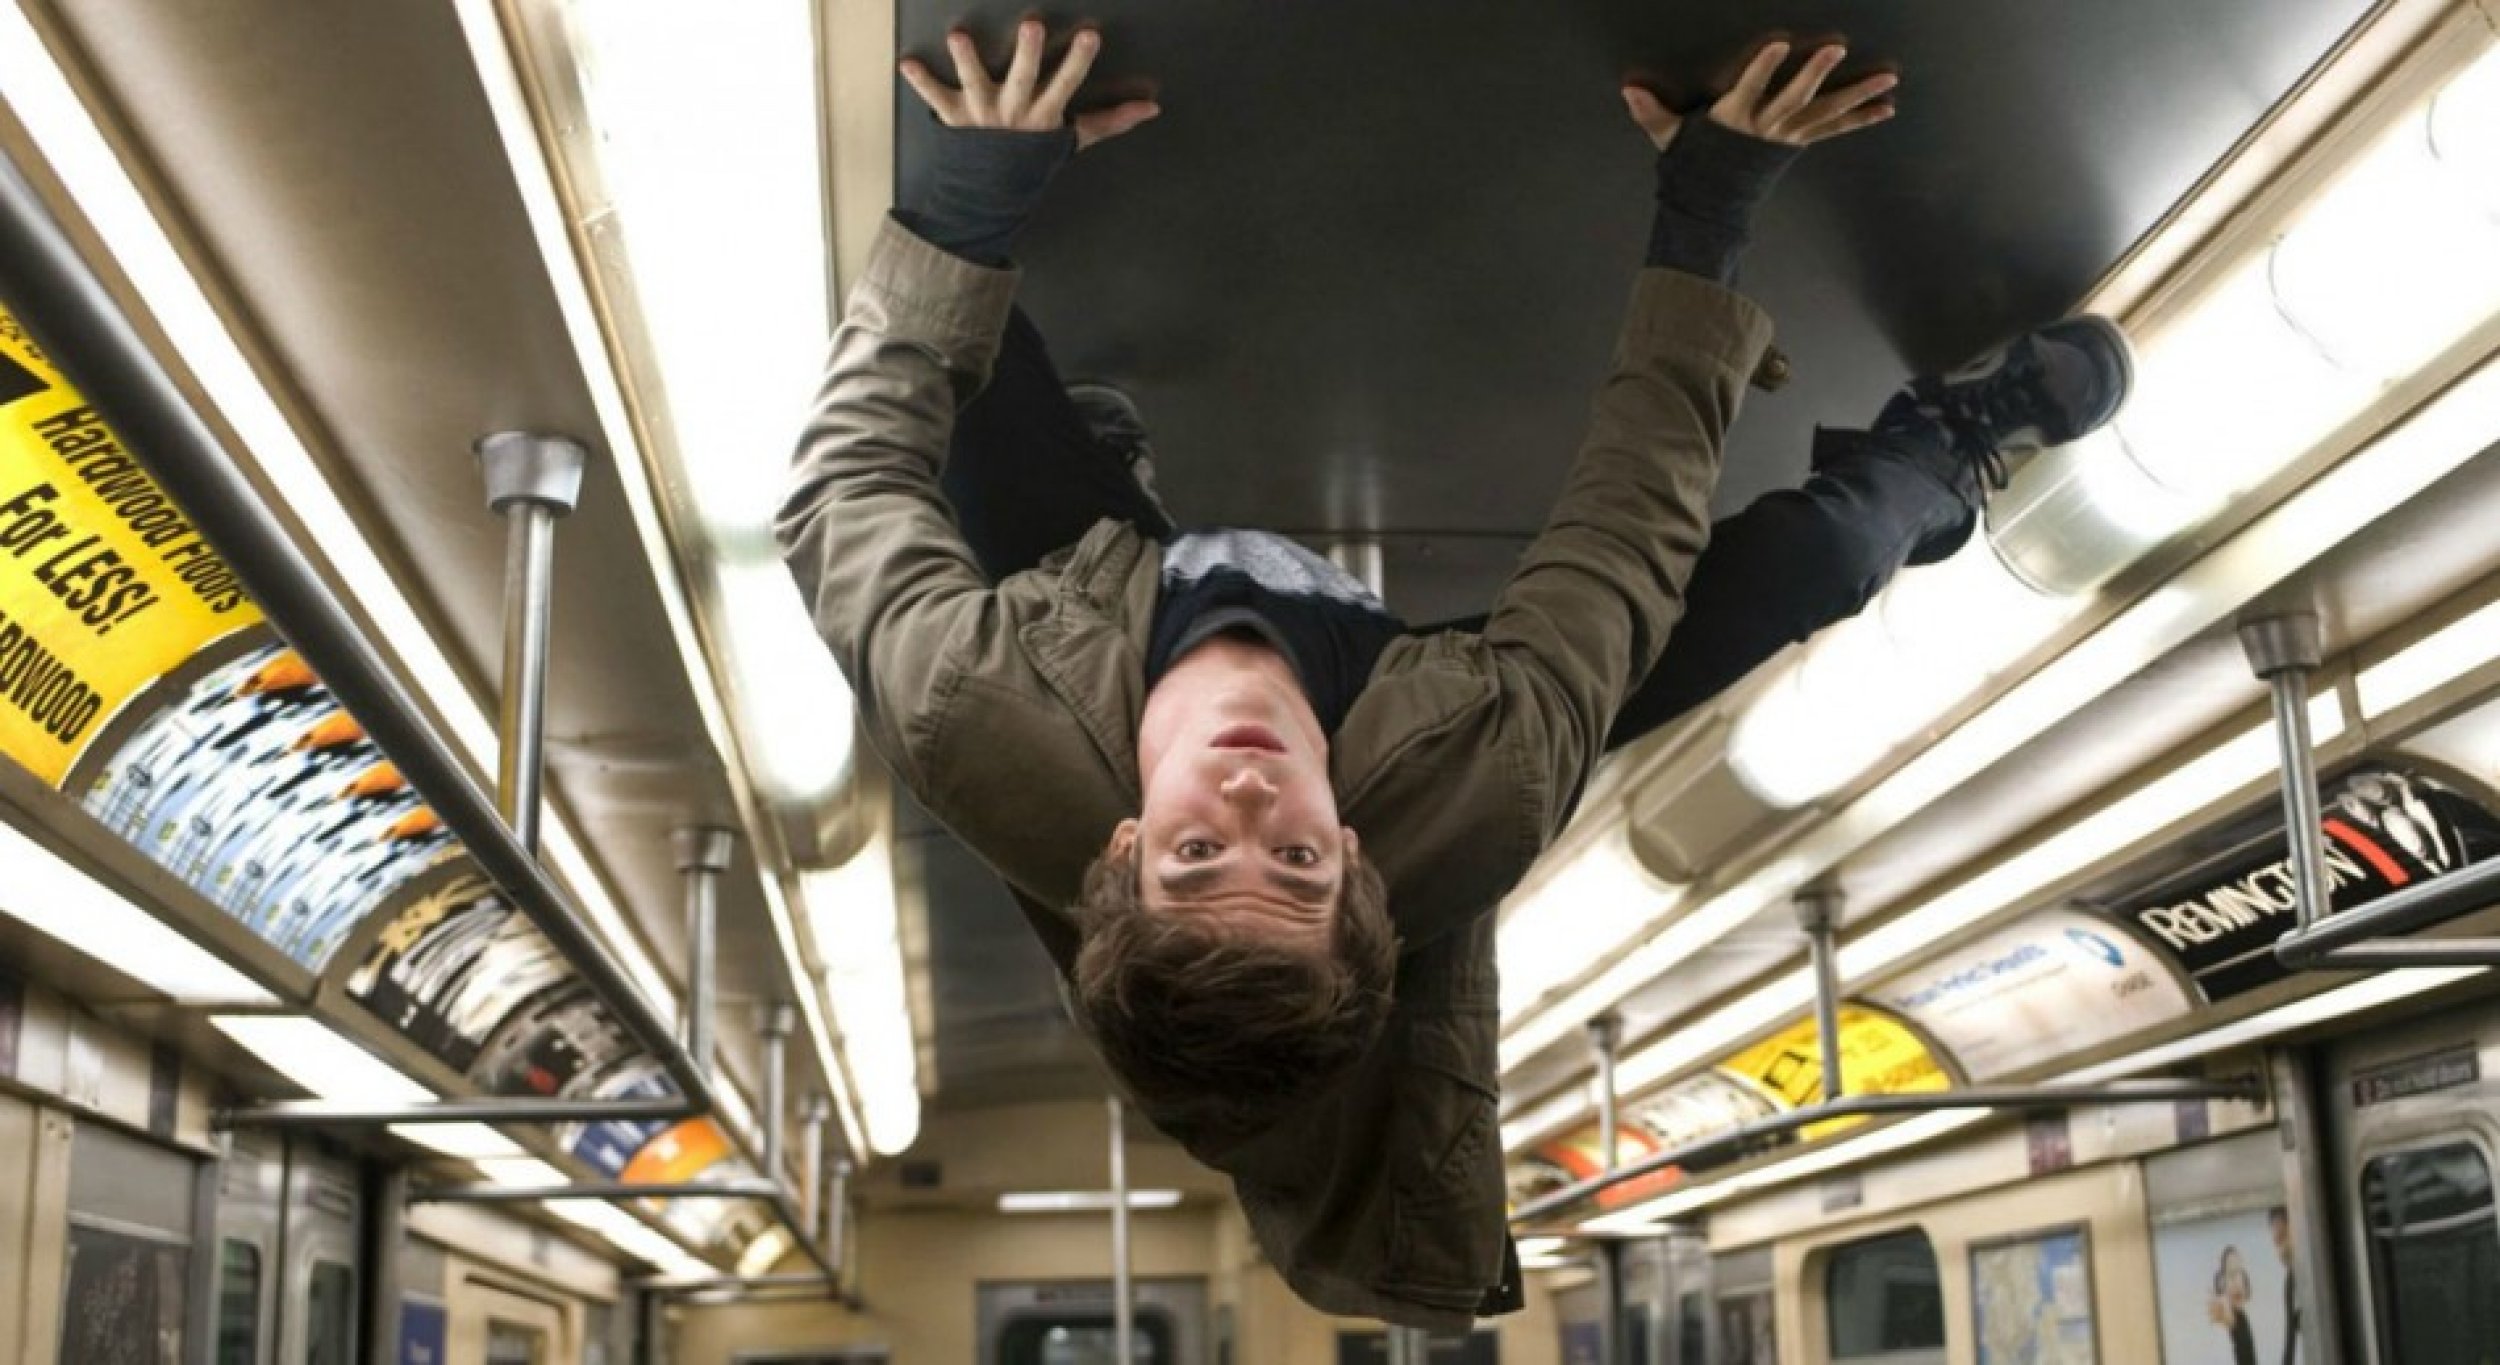 The Amazing Spider-Man 3D Trailer Hits Web New Images From the Untold Story Released